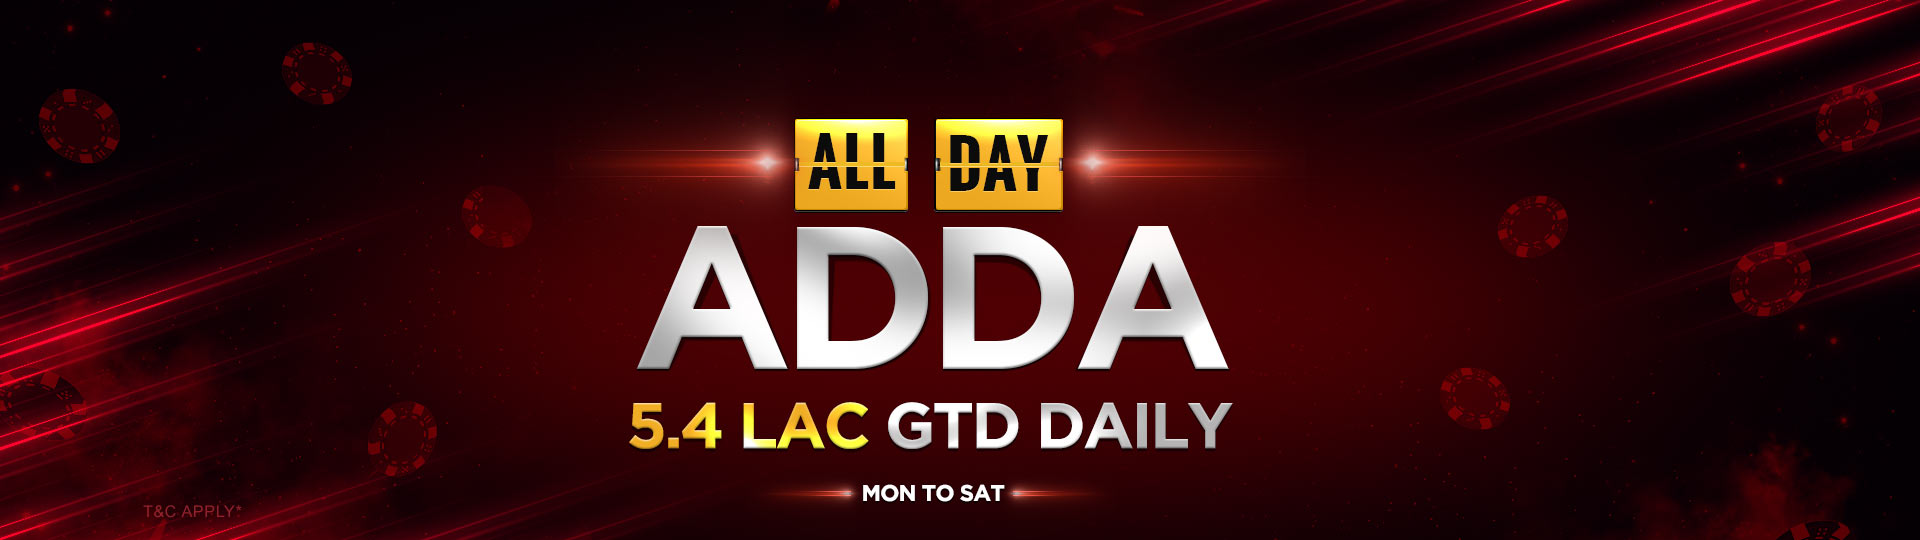 Adda Online tournaments|5.4 Lac Daily in winnings